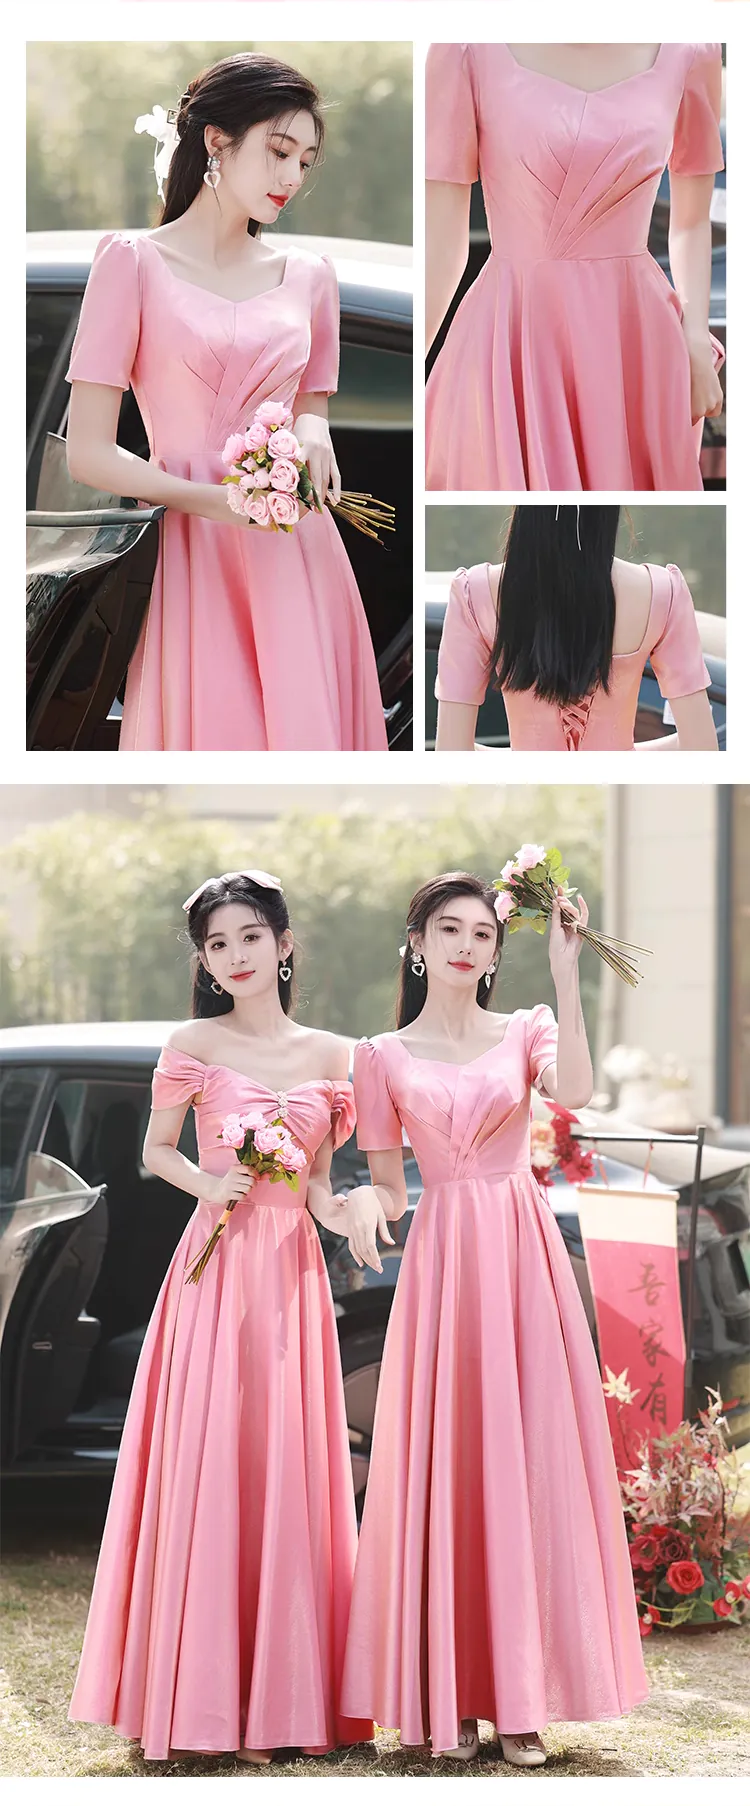 Charming-Pink-Satin-Bridesmaid-Dress-Short-Sleeve-Prom-Evening-Gown20